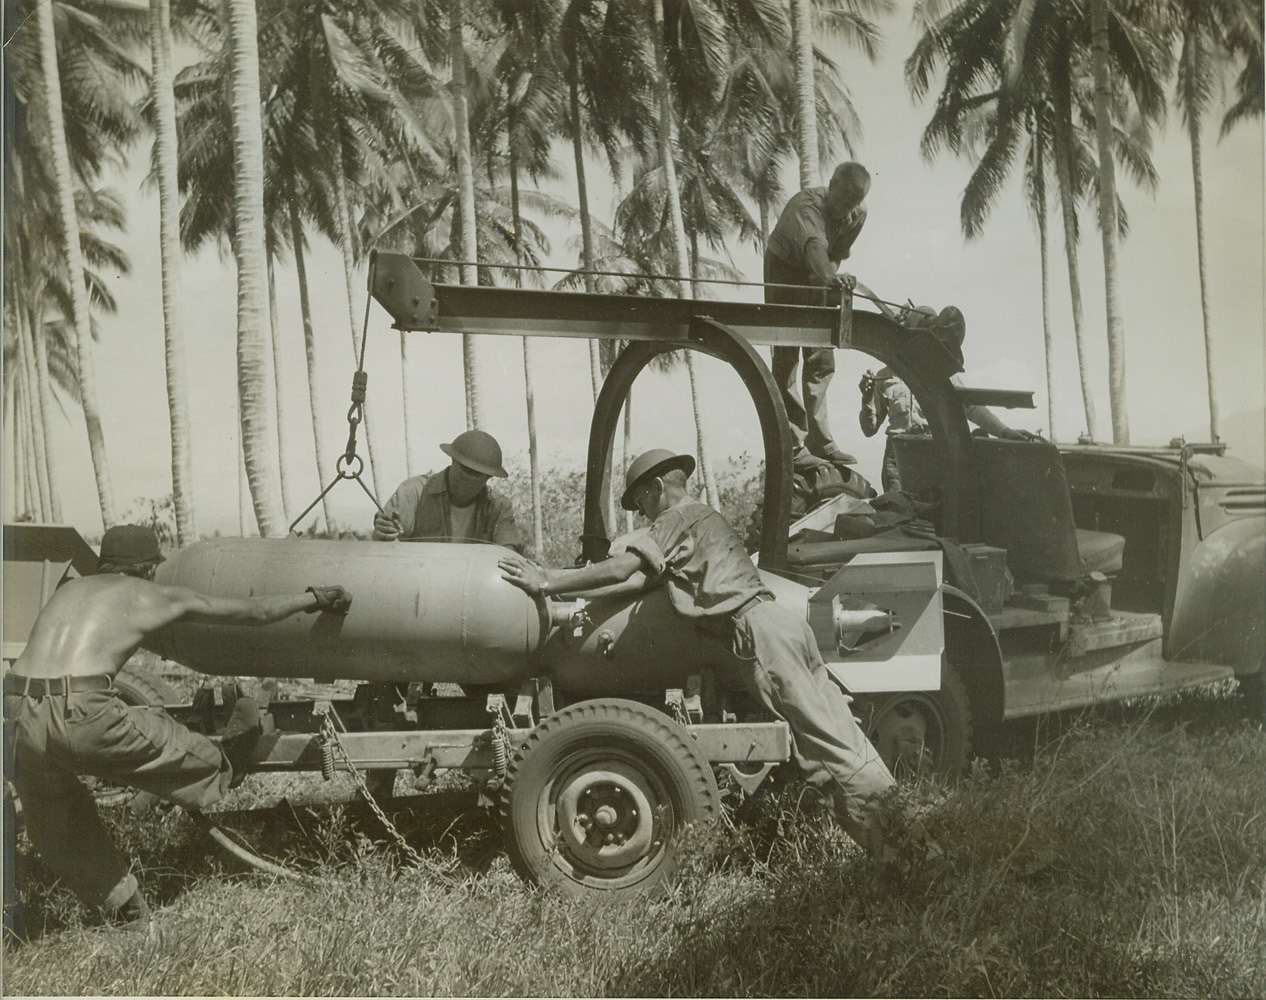 For Tojo -- Bad News from Guadalcanal, 10/14/1942. GUADALCANAL, SOLOMON ISLANDS -- With operational flights against Japanese ships and bases almost a daily affair, bomb loading crews of Marines on Guadalcanal airport are a busy lot. In this remarkable photo, bombs are being taken from "bomb gardens" concealed in palm trees, loaded on trailers and trundled onto the airport to be placed on U.S. Marine, Navy and Army bombers.  Credit (ACME);